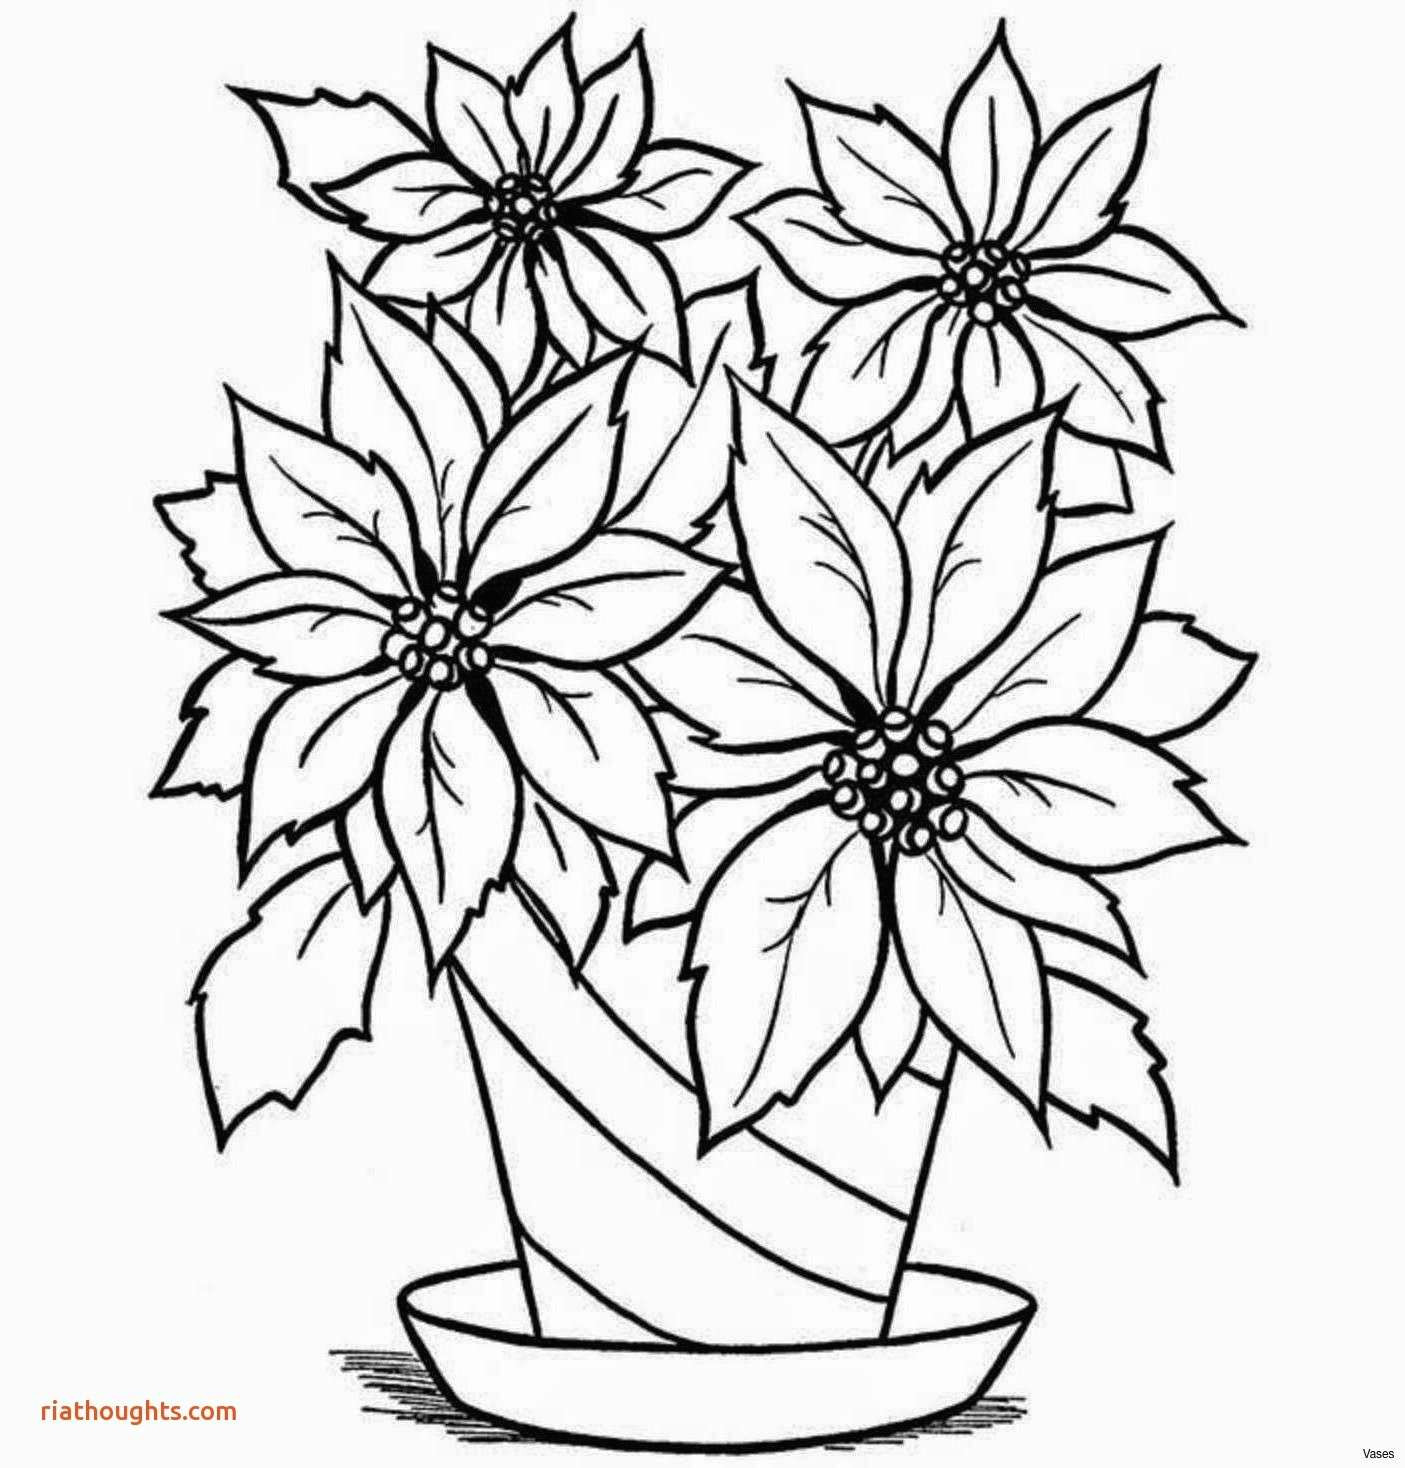 Drawings Of Flowers and Vases 25 Fancy Draw A Flower Helpsite Us